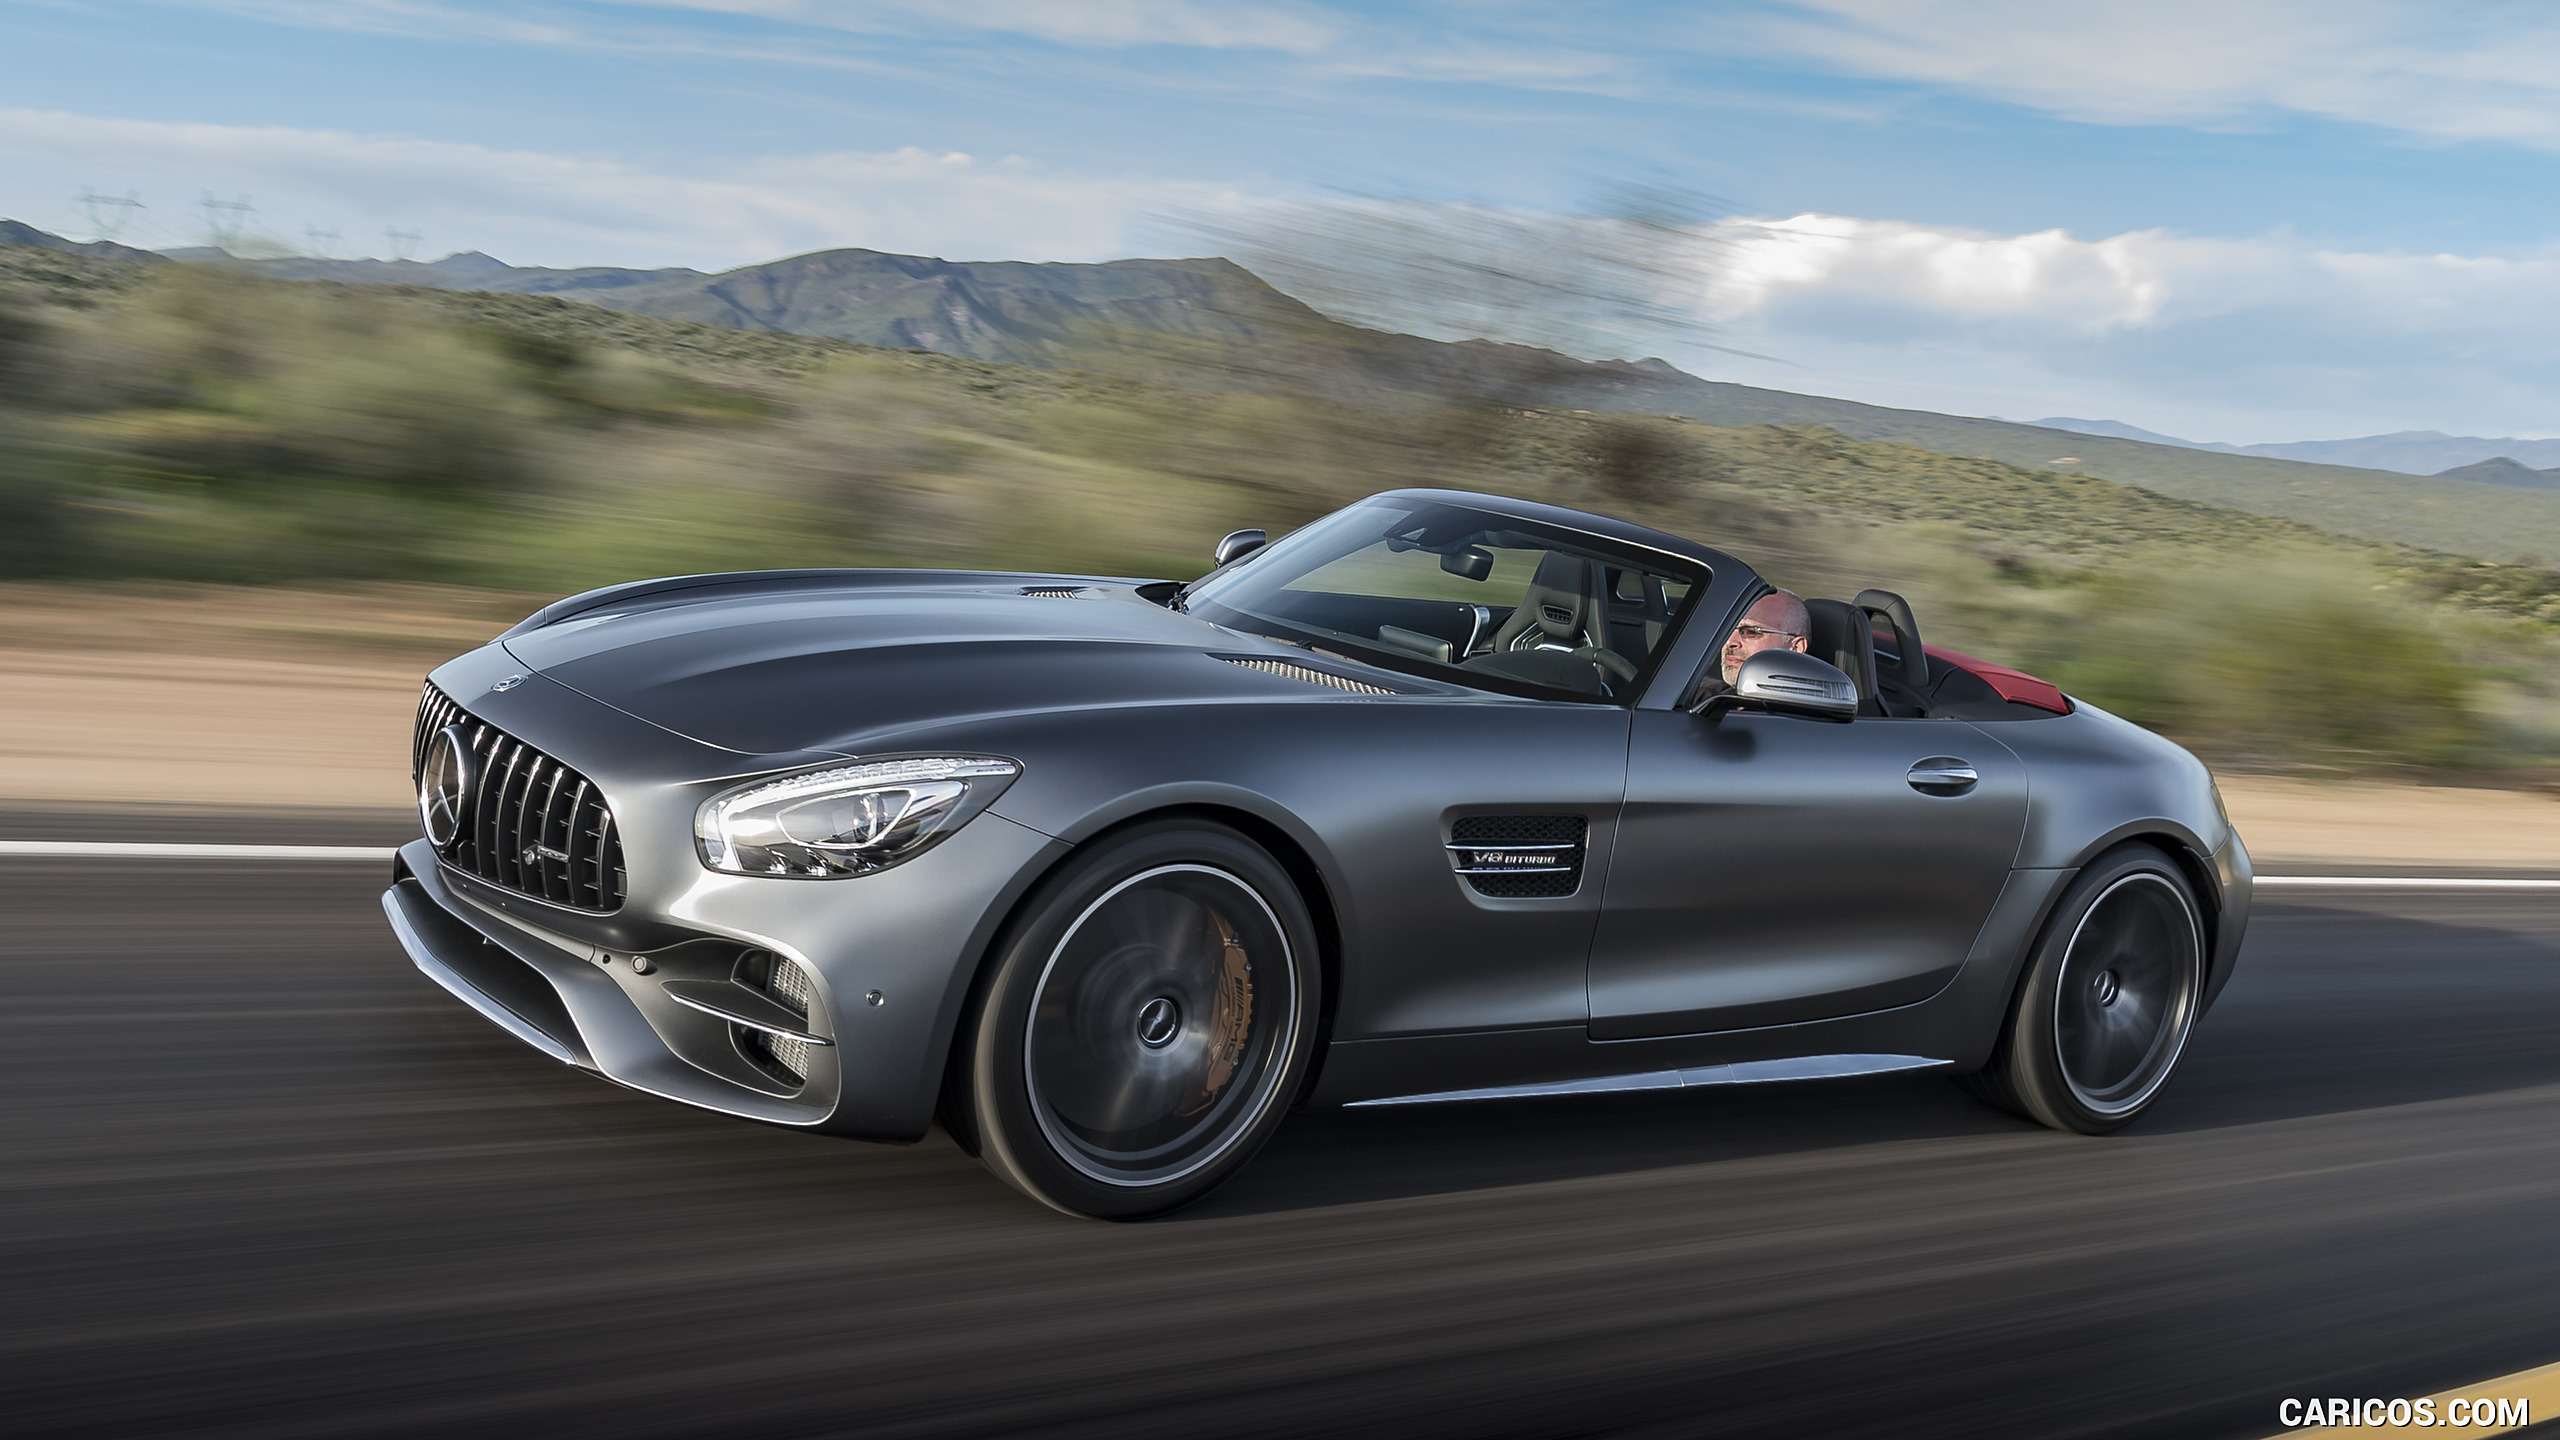 2018 Mercedes-AMG GT C Roadster - Front Three-Quarter, #293 of 350